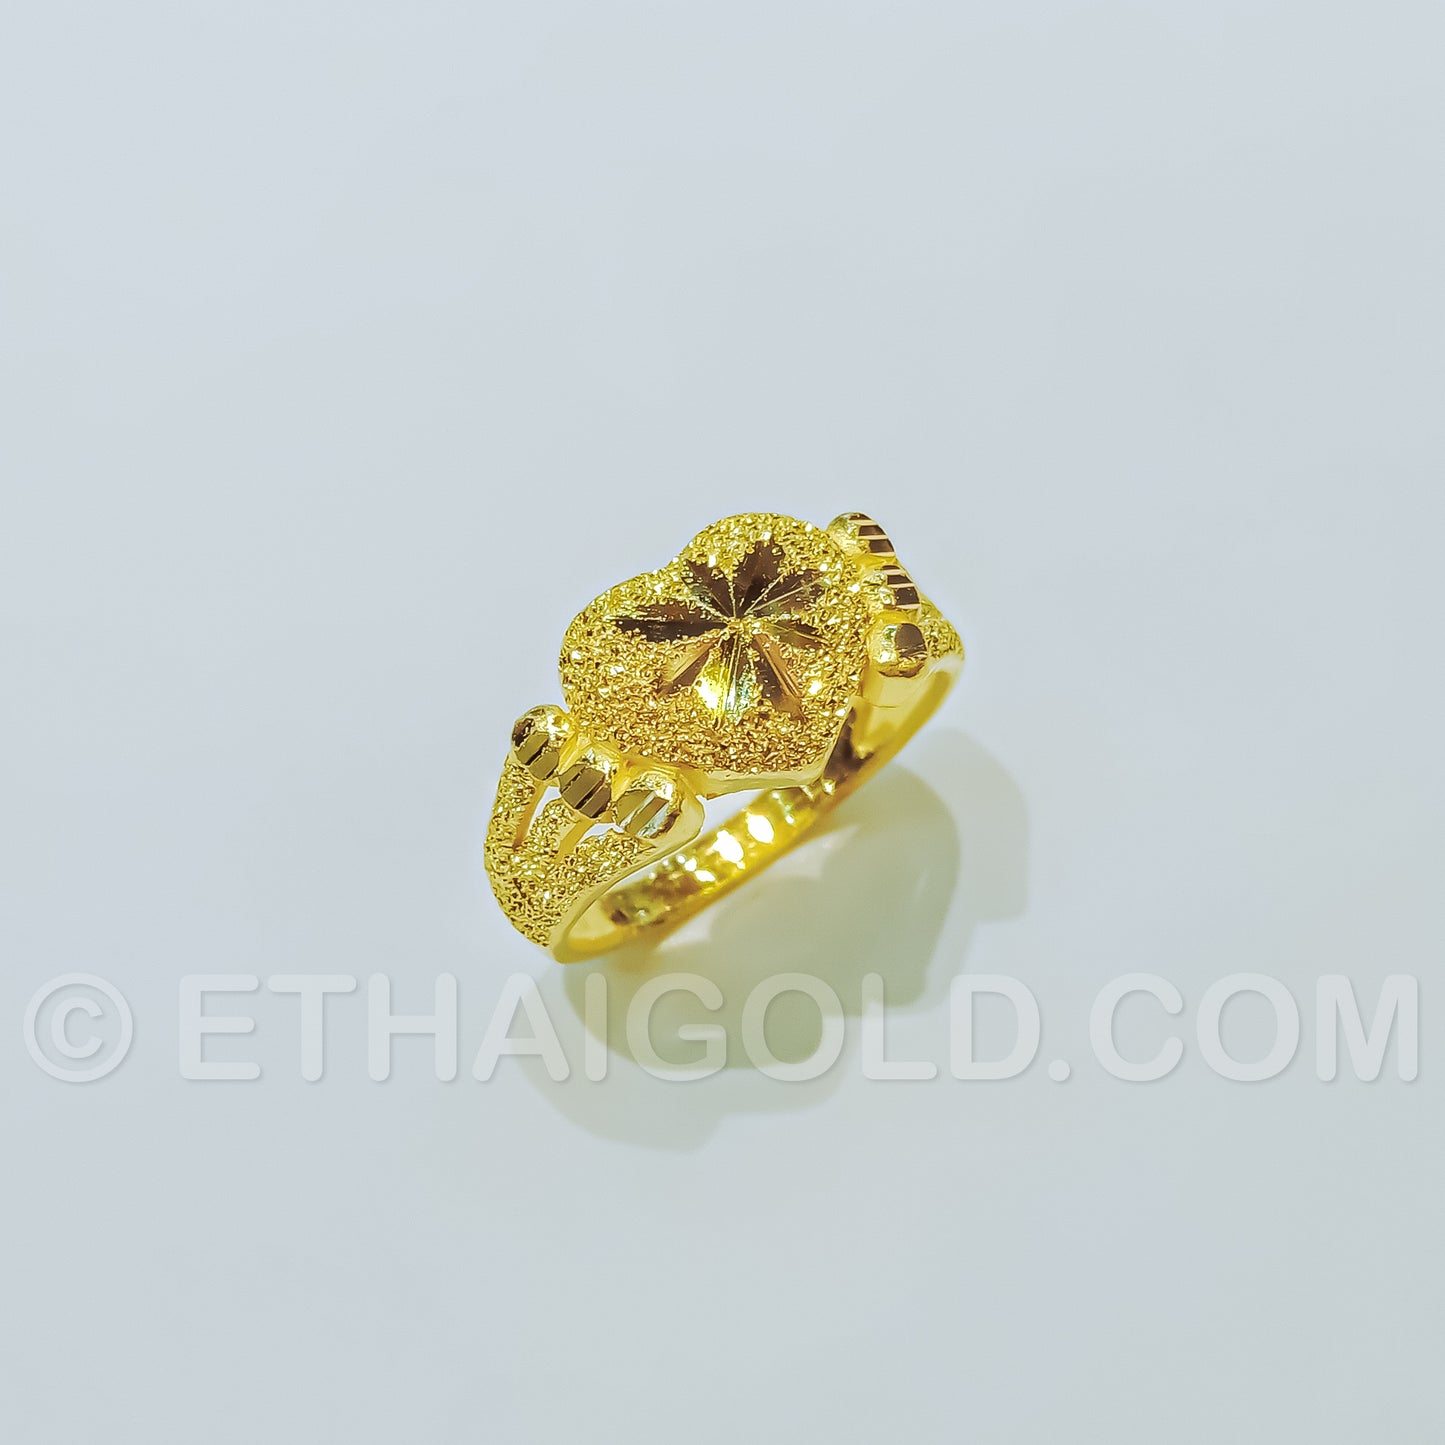 1/2 BAHT POLISHED SPARKLING DIAMOND-CUT SOLID HEART RING IN 23K GOLD (ID: R0502S)